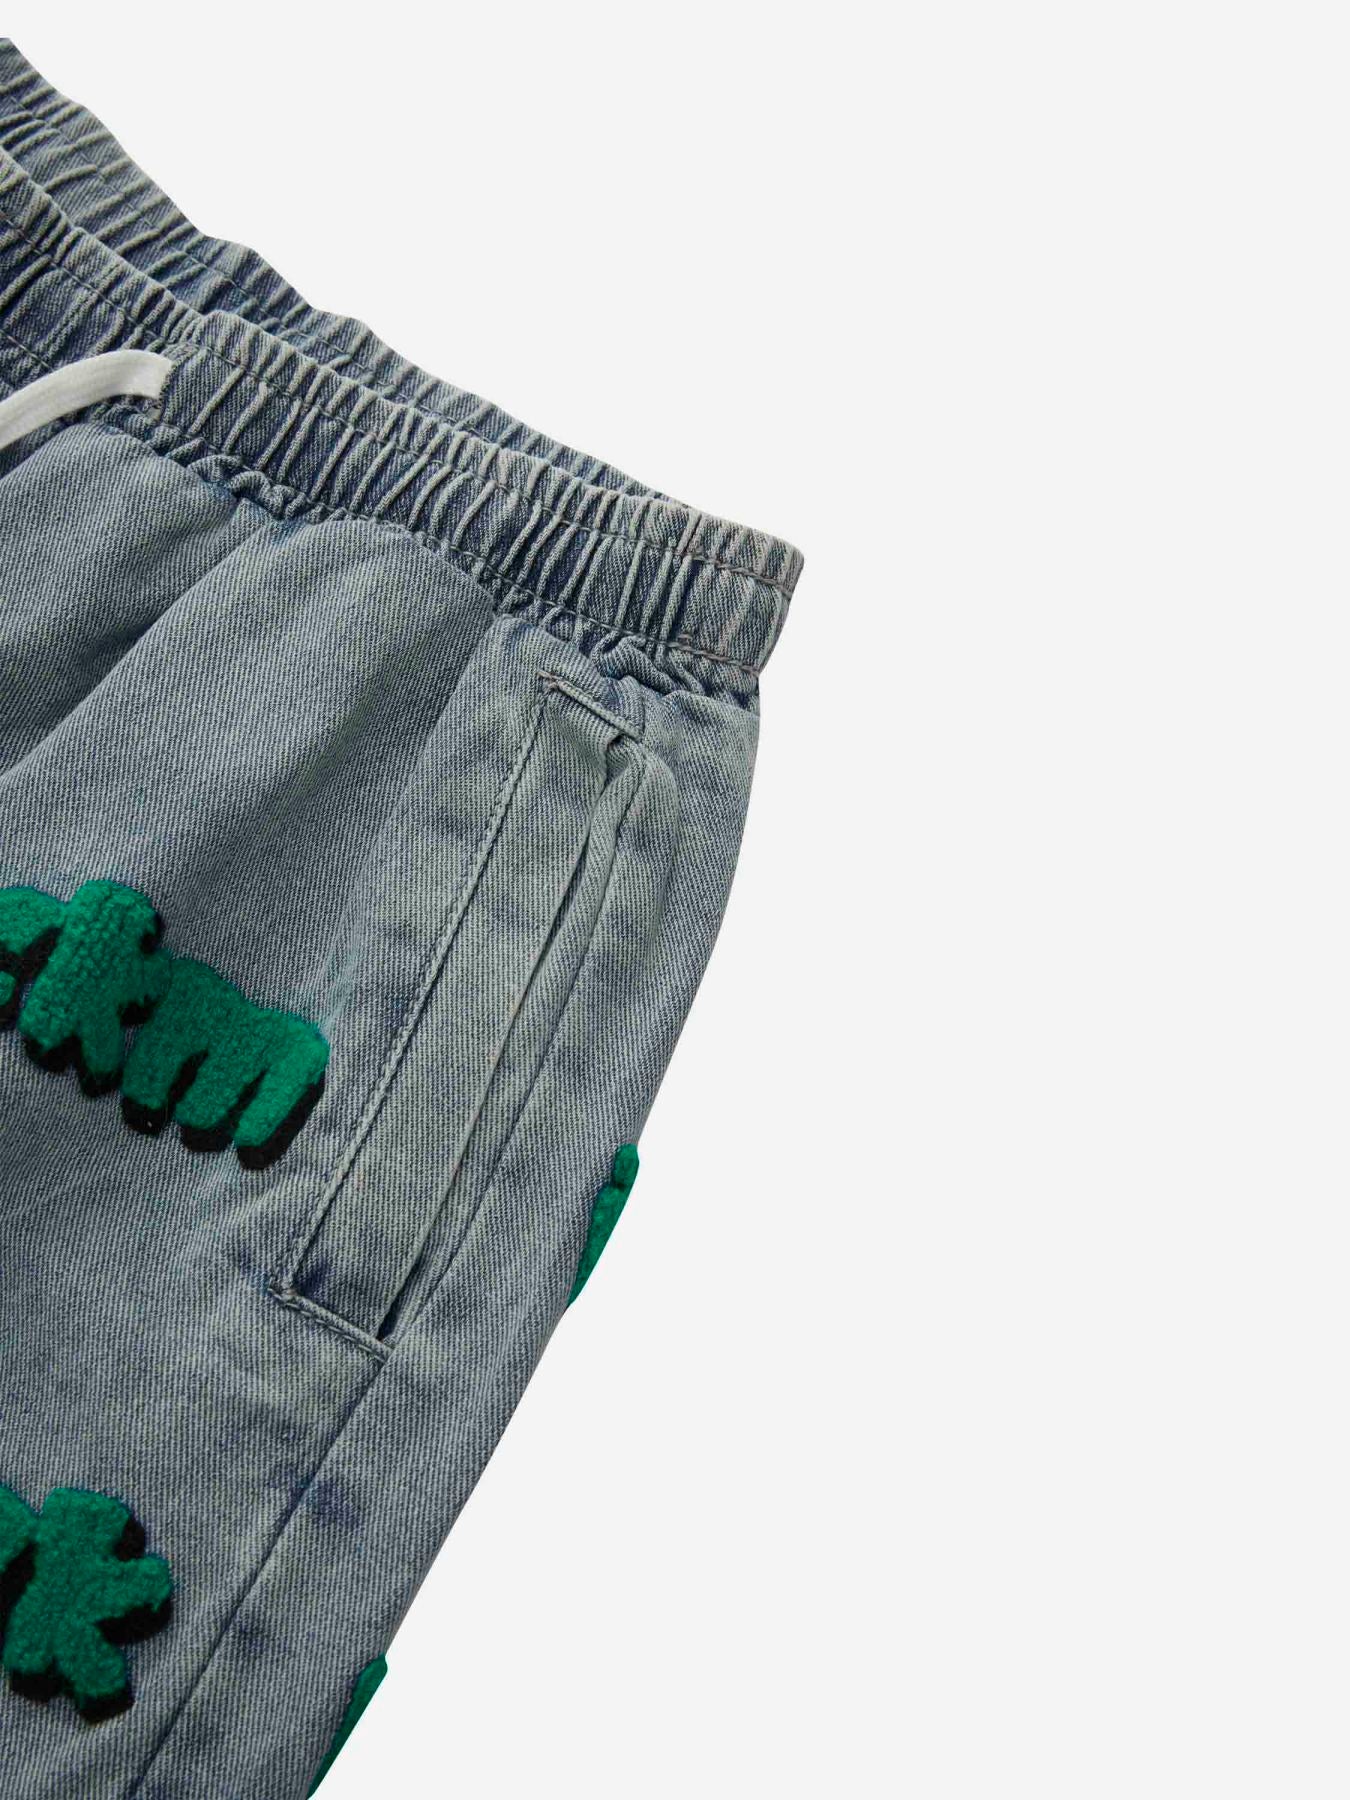 The Supermade Embroidered Denim Shorts